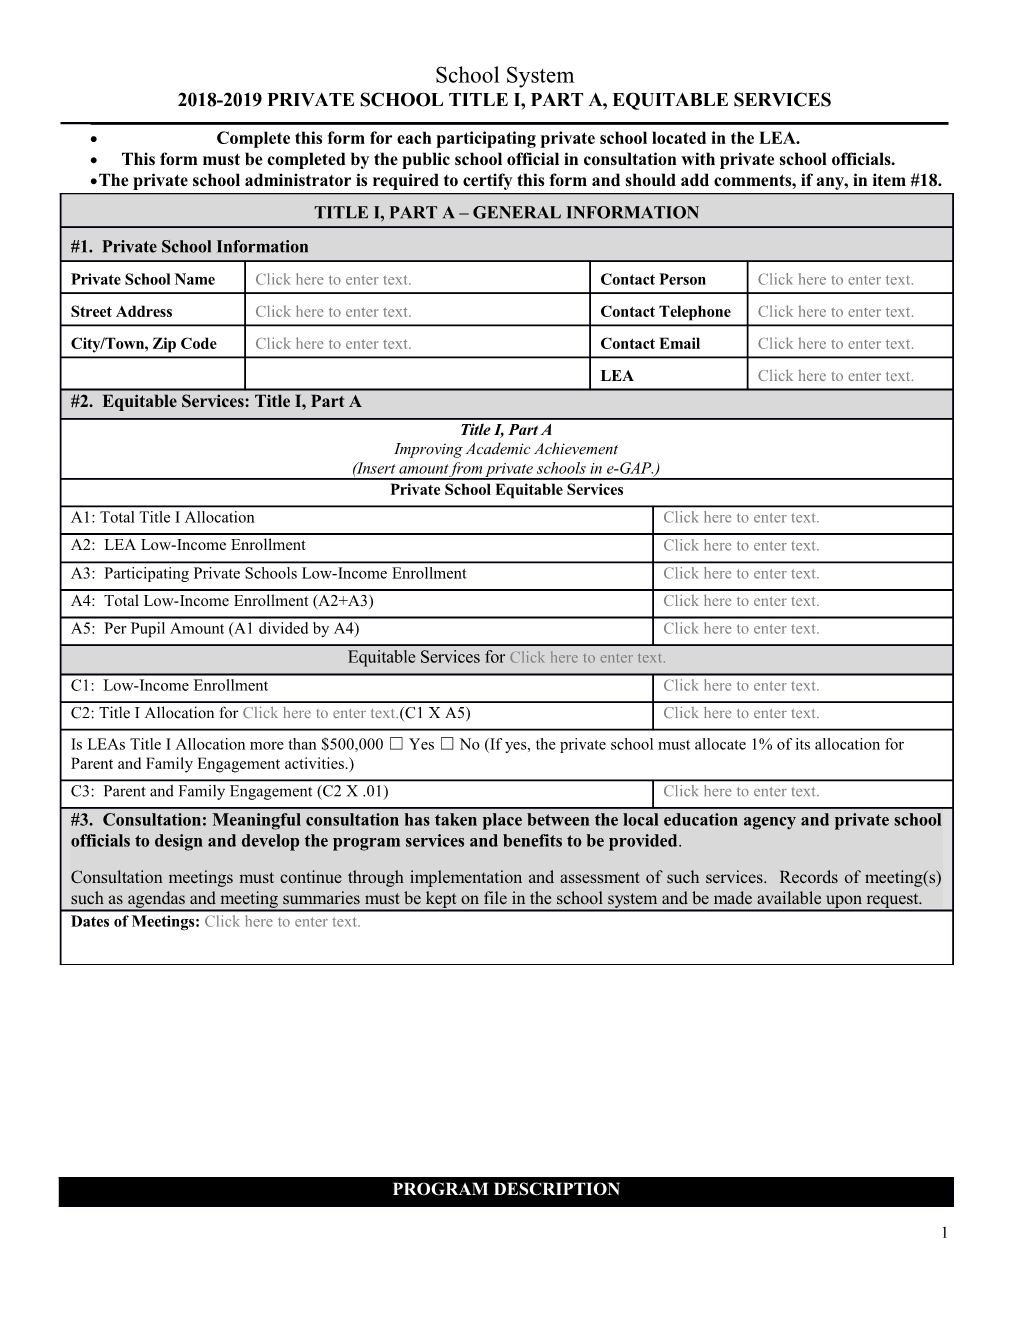 2018-2019 Private School Title I Worksheet and Service Agreement